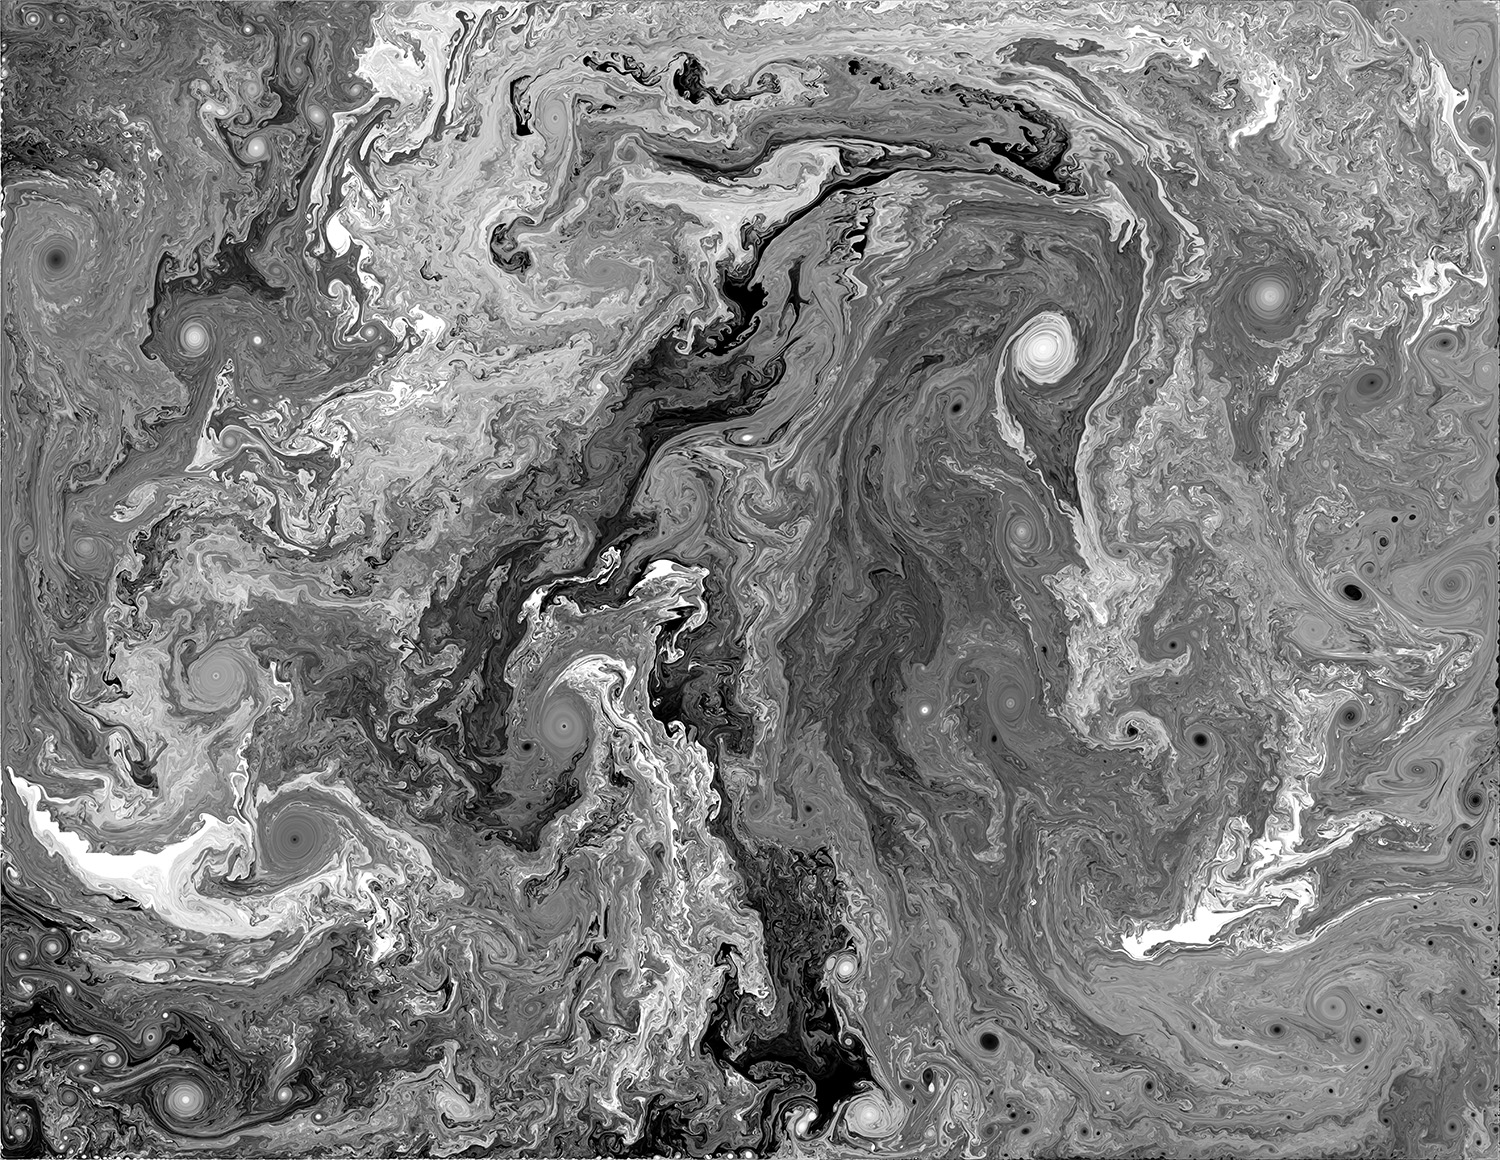 Patterns reminiscent of the swirling clouds of Jupiter, generated via a very high resolution BiMocq2 simulation.